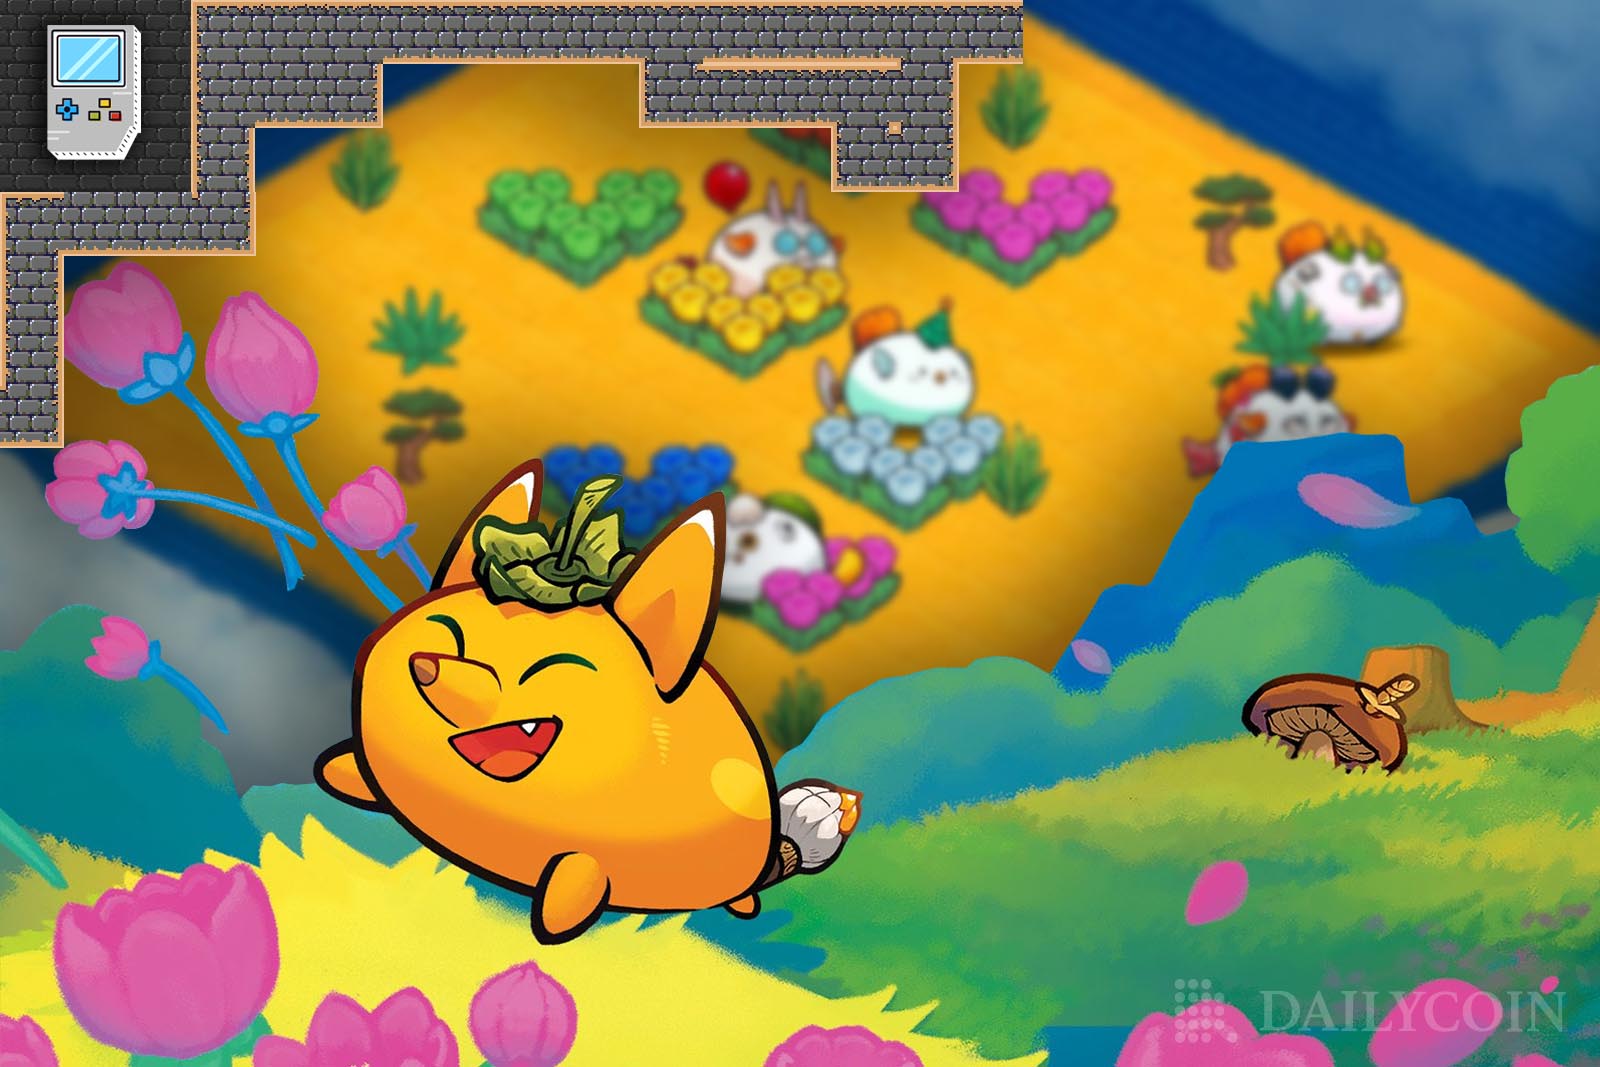 cryptogaming axie raylight releases landgame creature persimmon happy